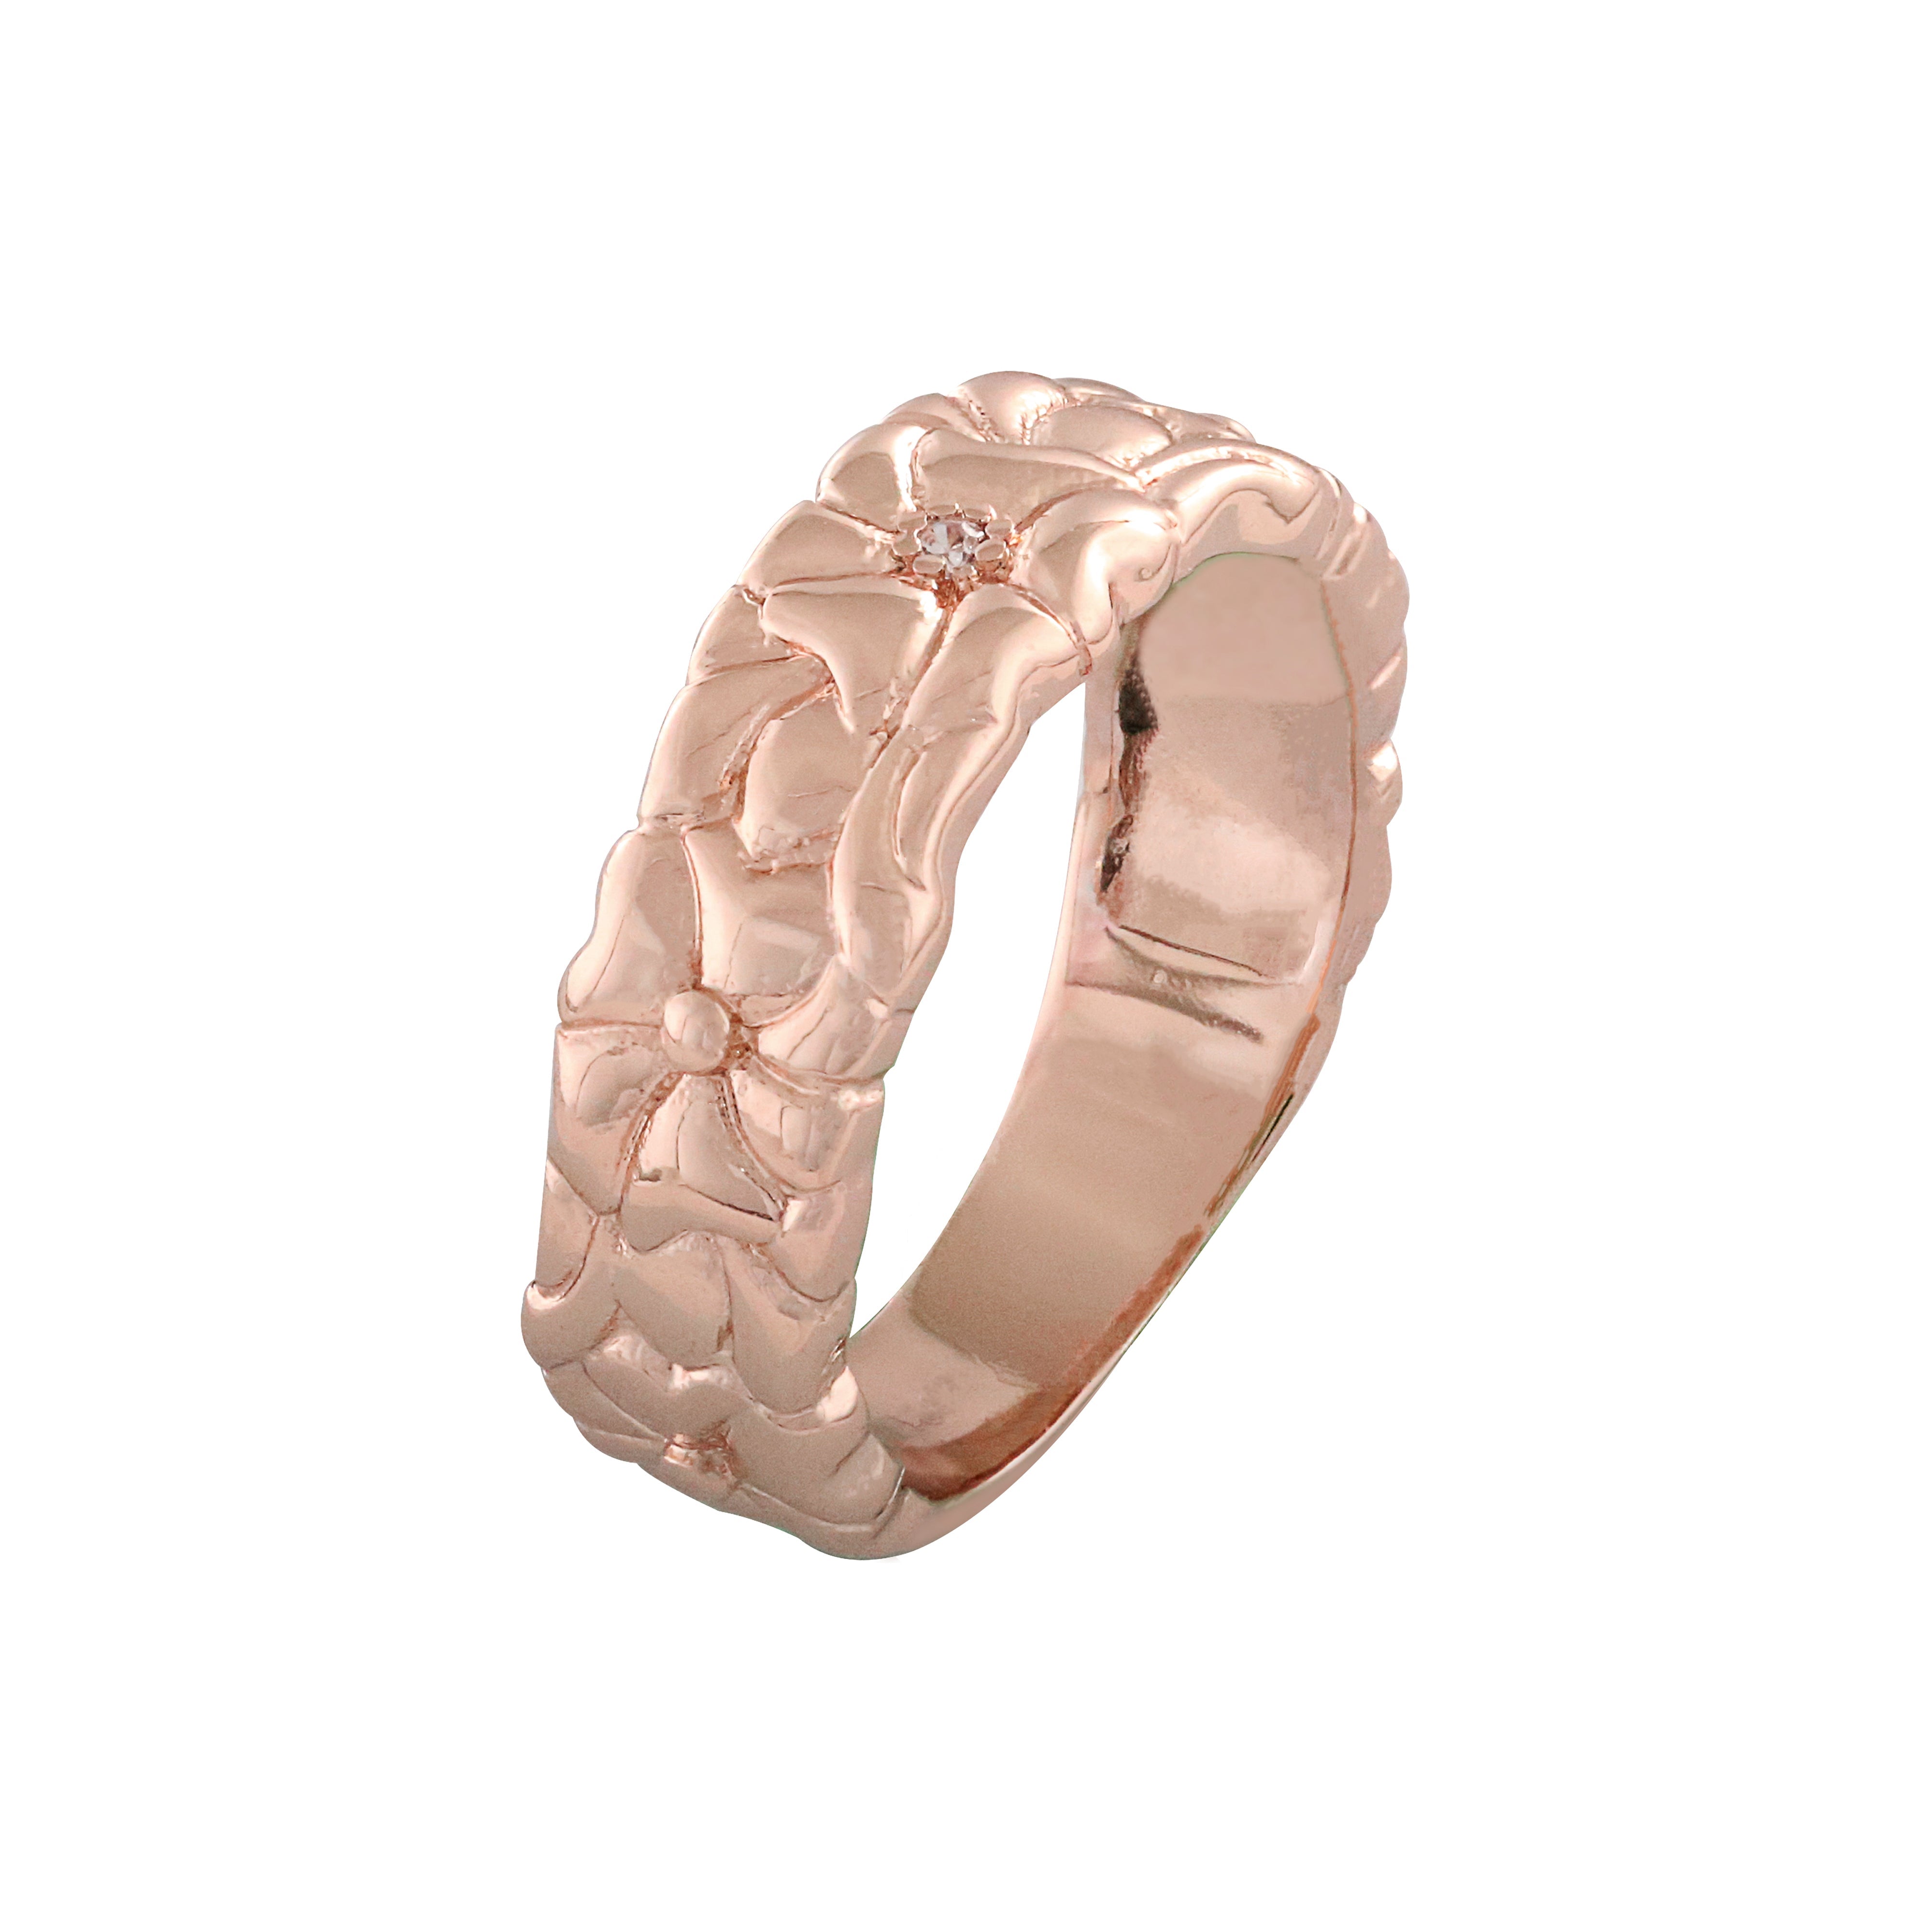 Double lightning rings in 18K Gold, 14K Gold, Rose Gold, two tone plating colors